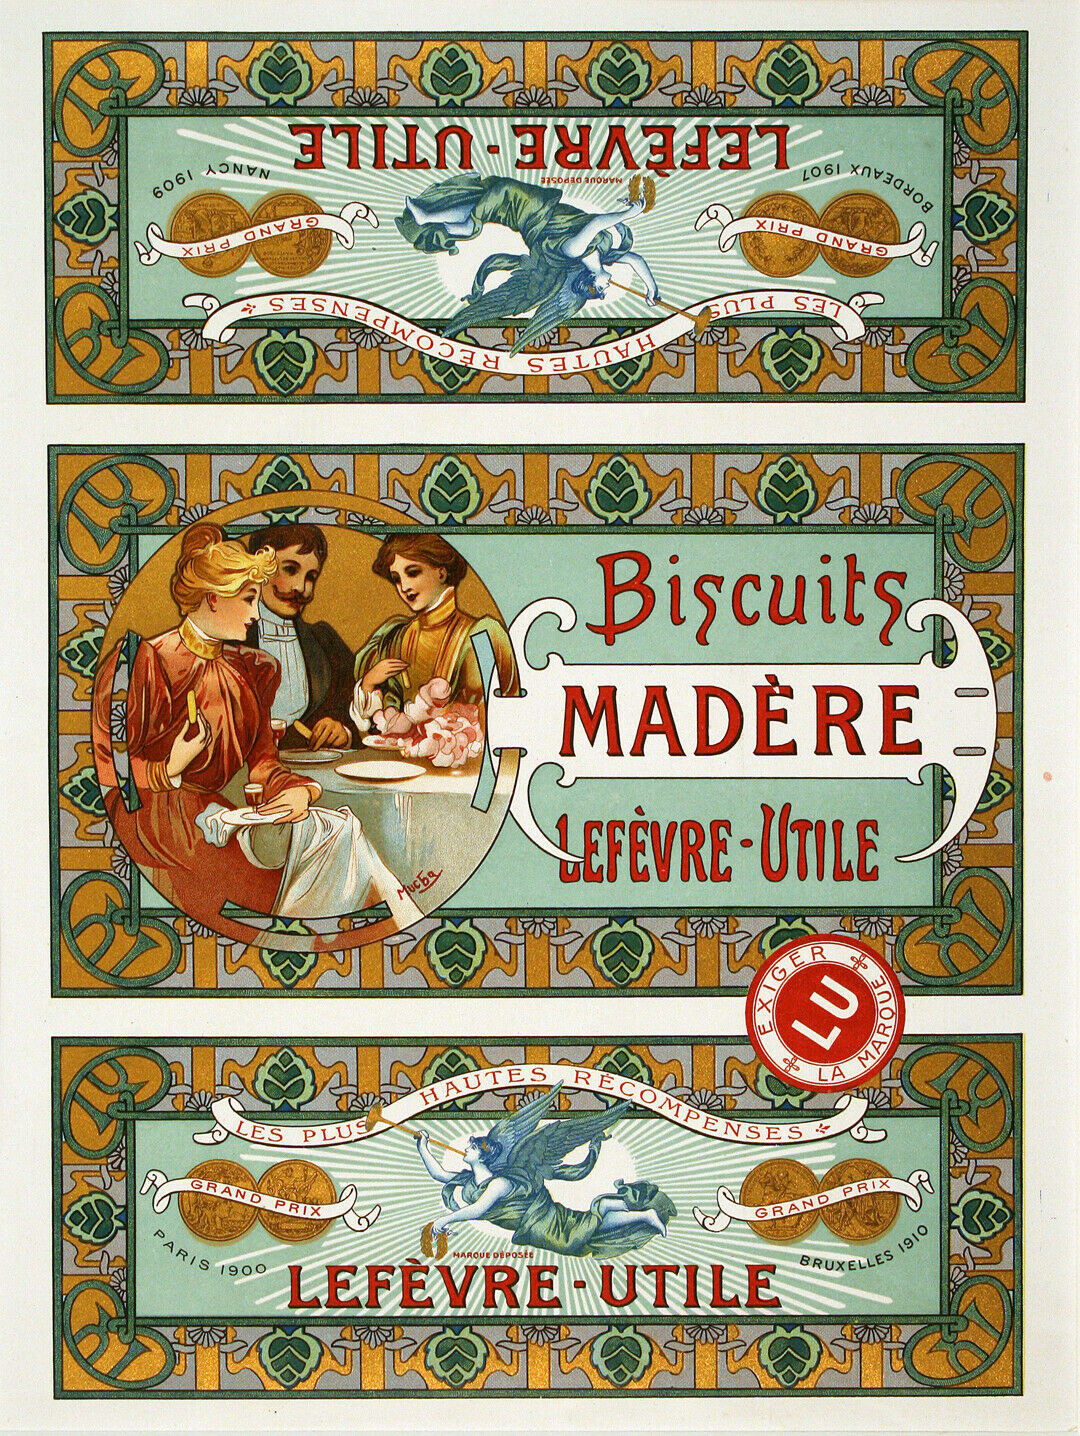 Original MADERE BISCUITS LEFEVRE UTILE small format bisquit label box designed by Alphonse Mucha iin the late 1890's. Presented in an acid free 16" x 20" presentation folder for protection. This cookie or biscuits image in the art nouveau format is a 